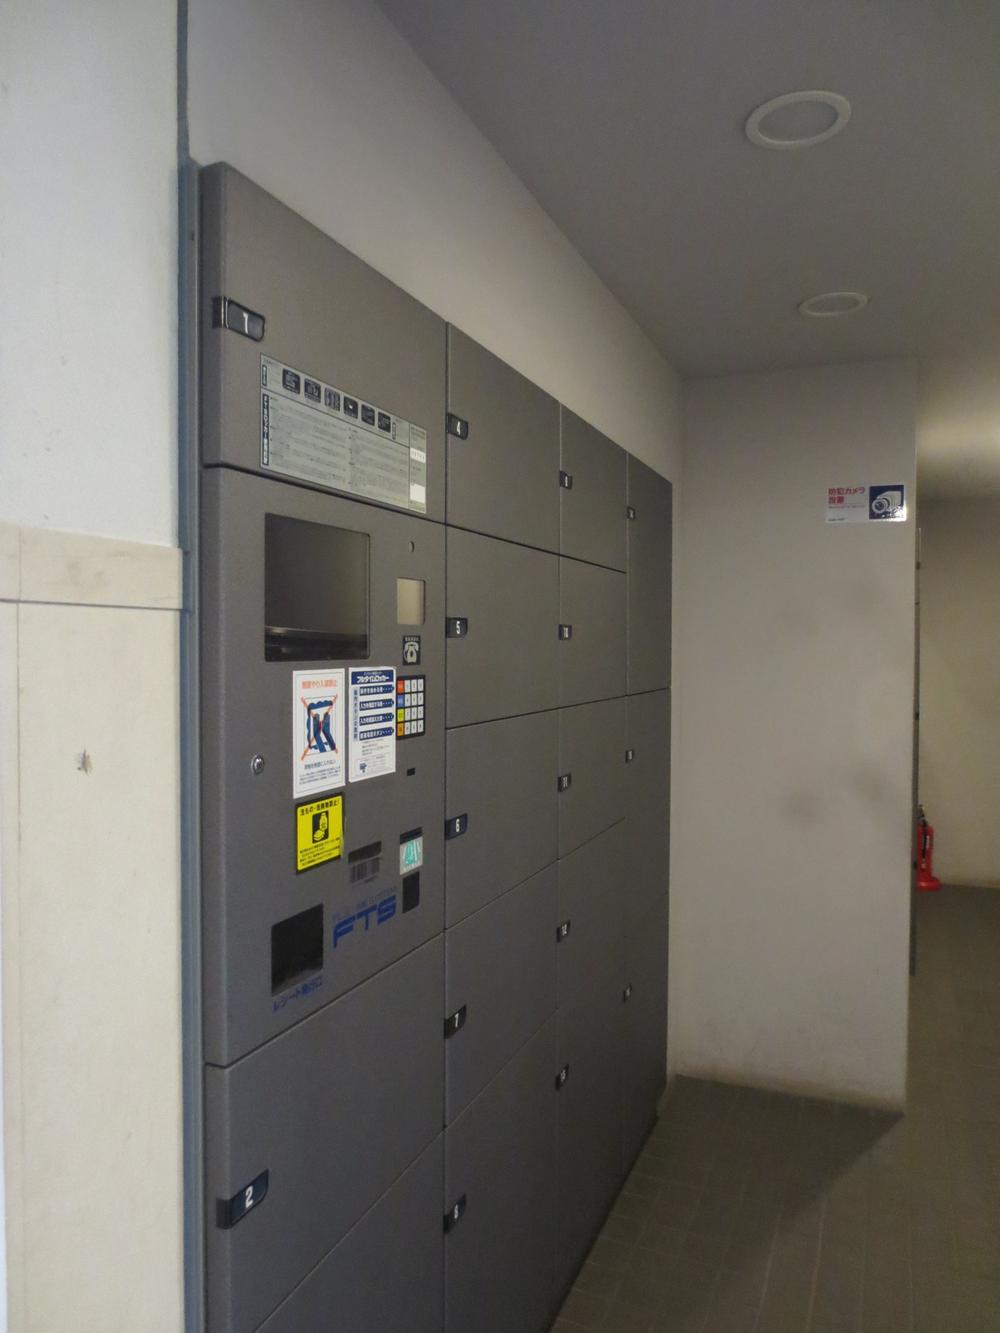 Other common areas. Home delivery locker. It is convenient to the baggage claim at the time of absence.